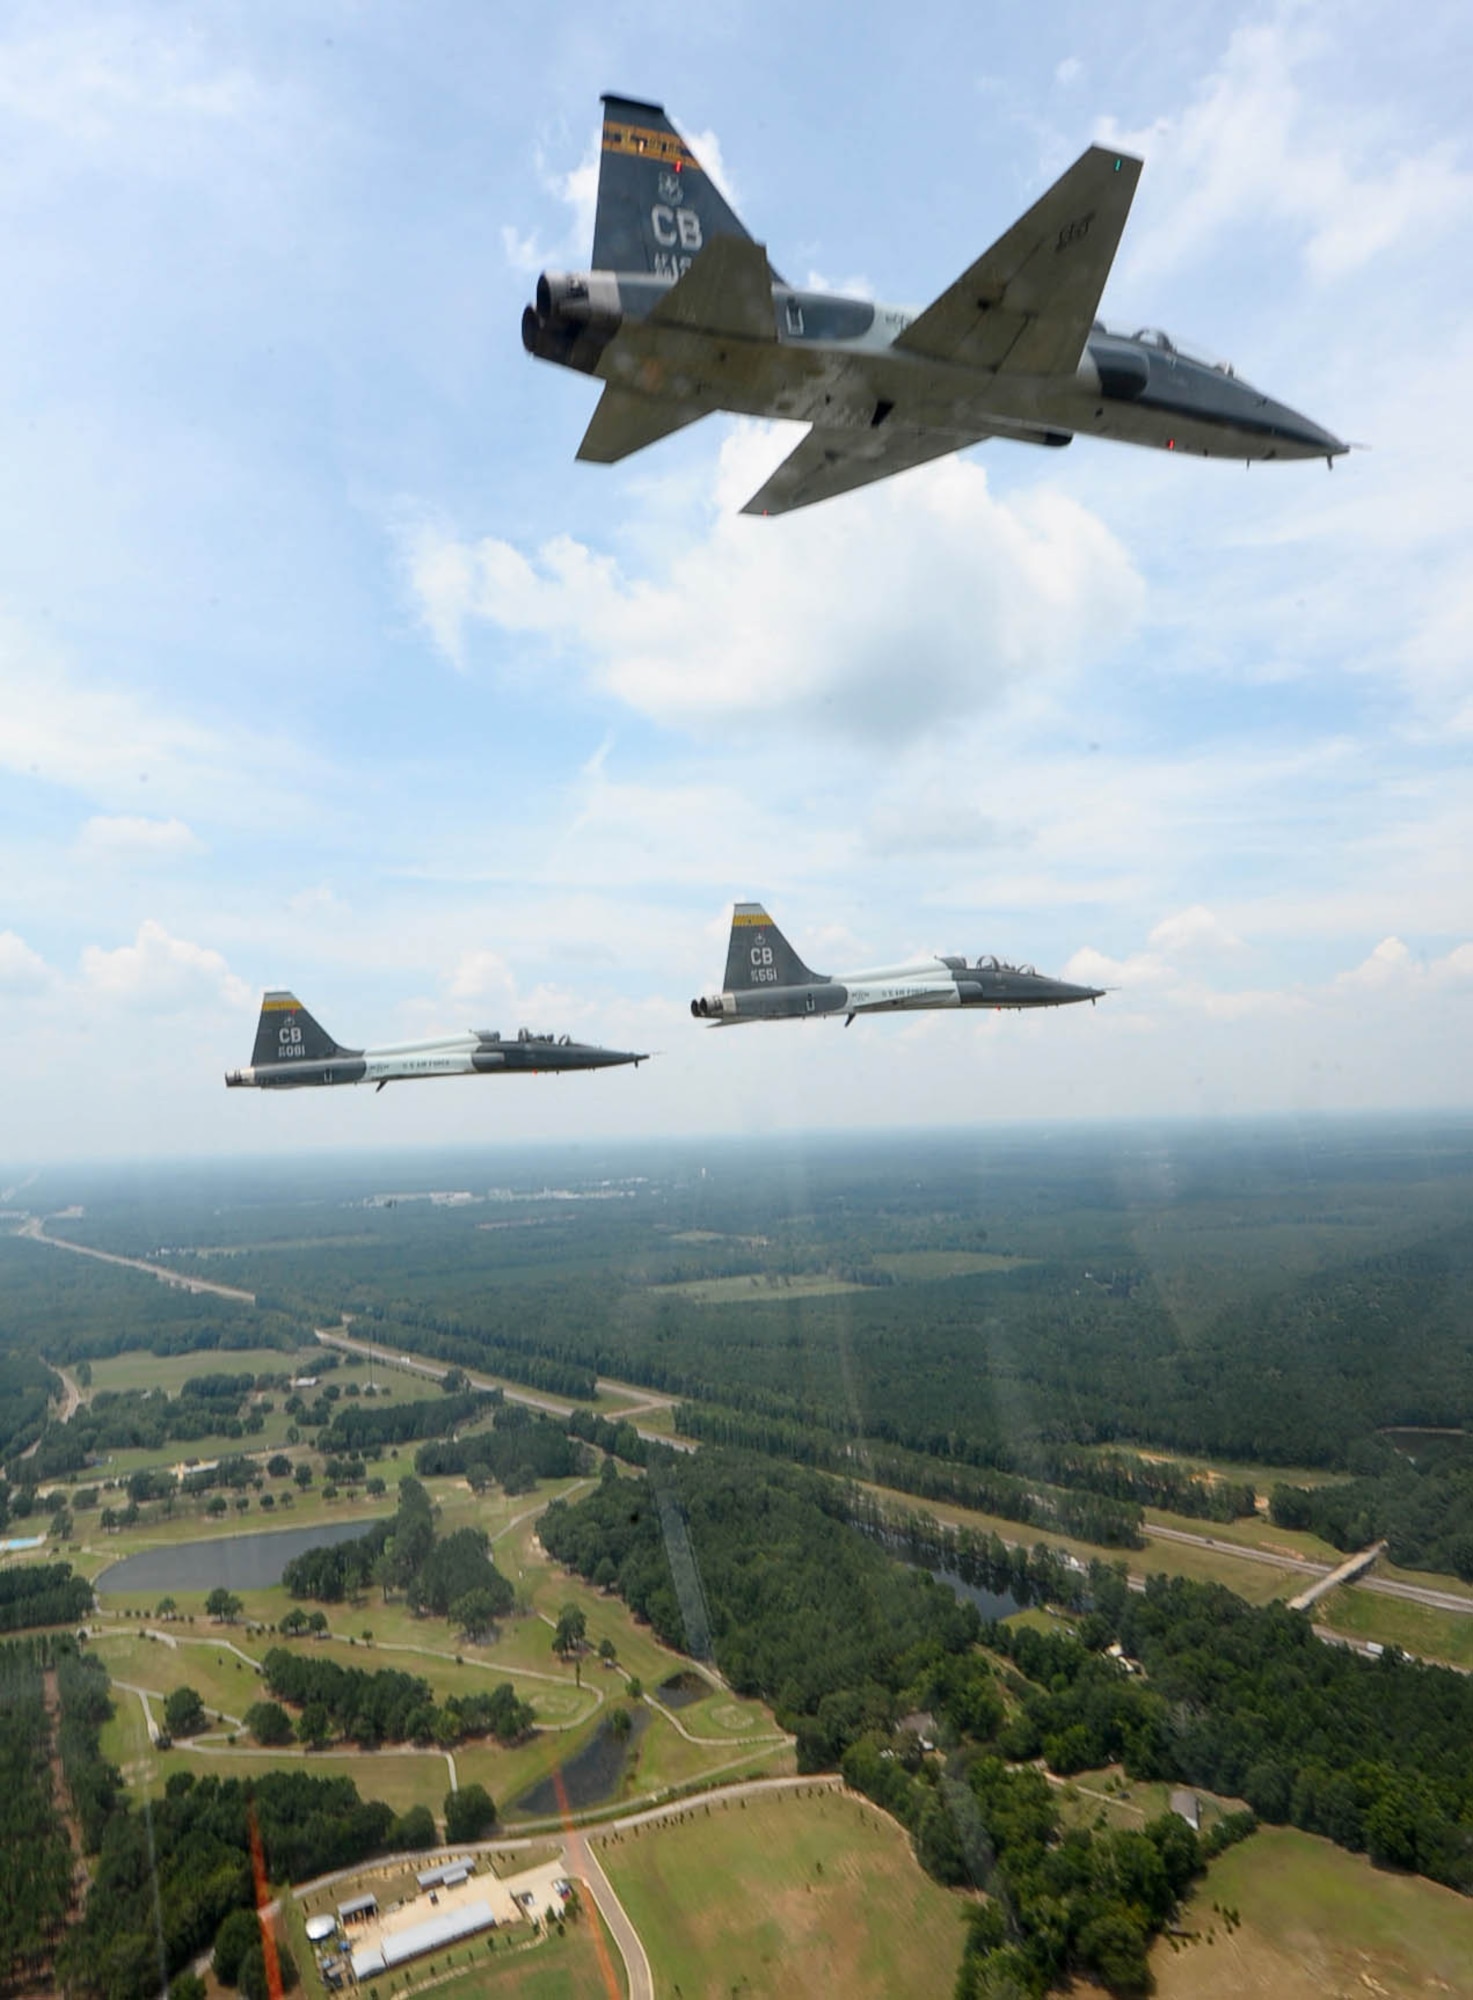 Four T-38 Talons prepare to begin the missing man formation in tribute to Capt. Fredrick Partridge Aug 10, 2015, at the end of his memorial service at Mississippi Veterans Memorial Cemetery. The T-38s from Columbus Air Force Base, Mississippi, performed the aerial salute to Partridge exactly 63 years after his disappearance during the Korean War. (U.S. Air Force photo/Airman 1st Class Daniel Lile)